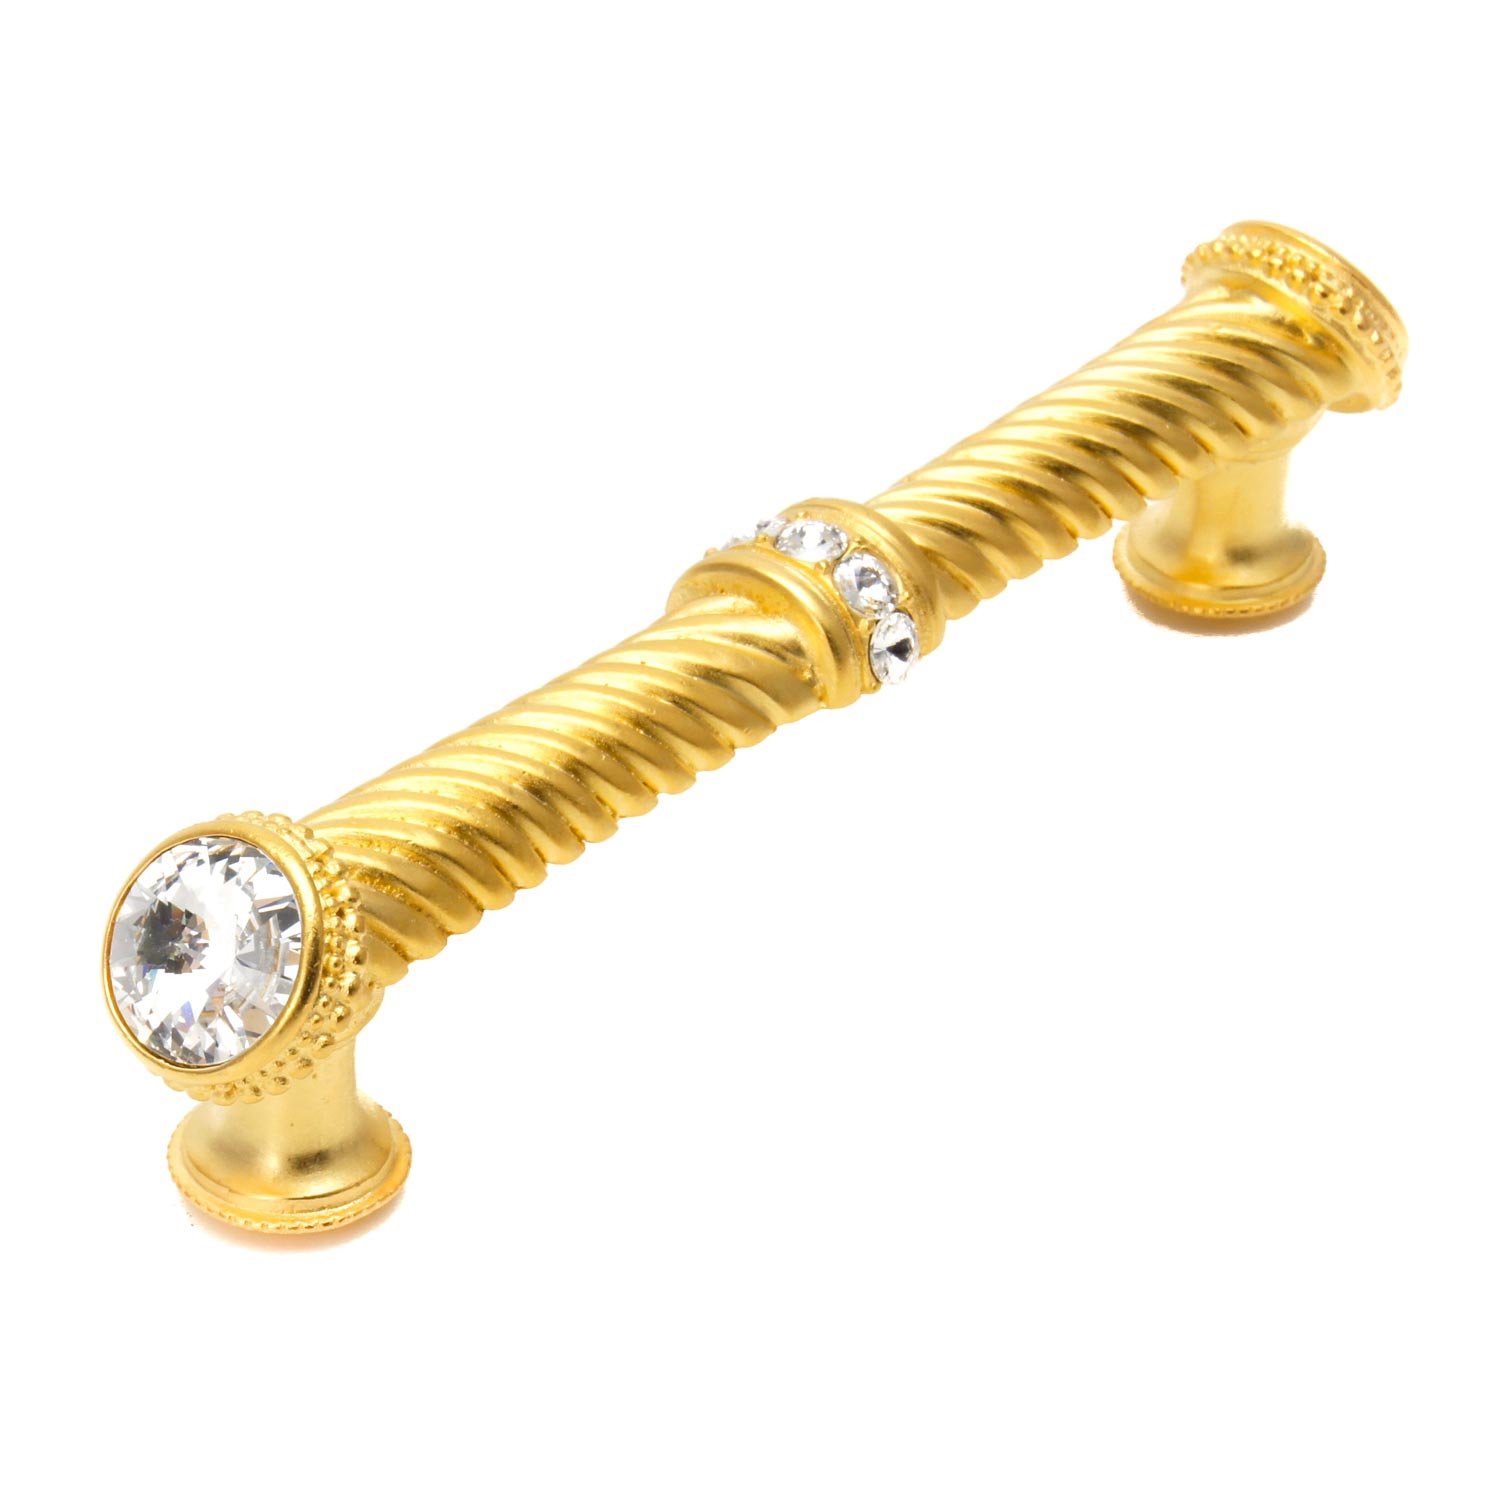 Carpe Diem Caché 5" Centers Large Pull With End & Center Swarovski Crystals in Soft Gold with Aquamarine